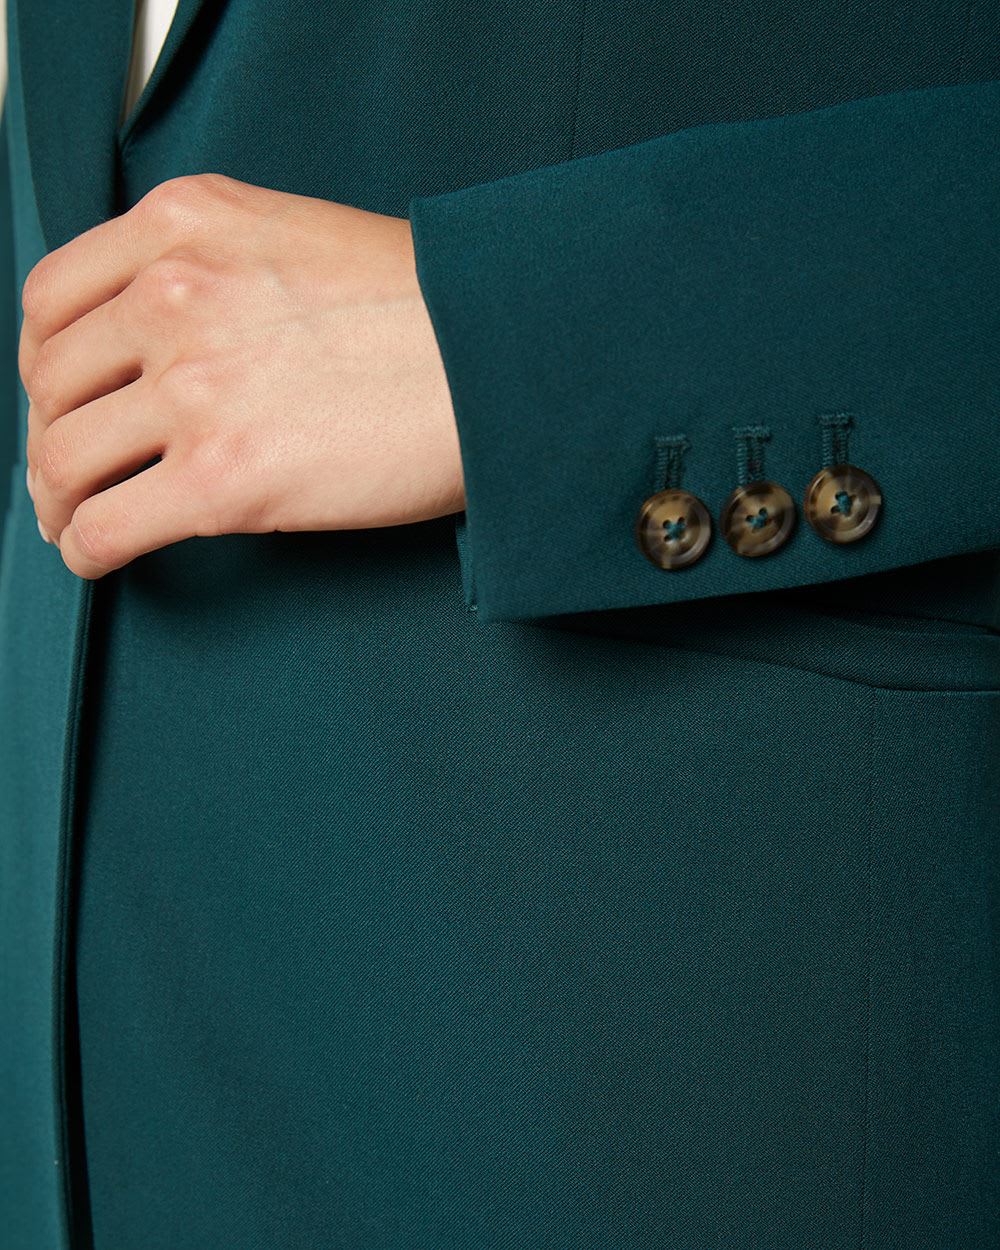 Peacock green Stretch fitted blazer